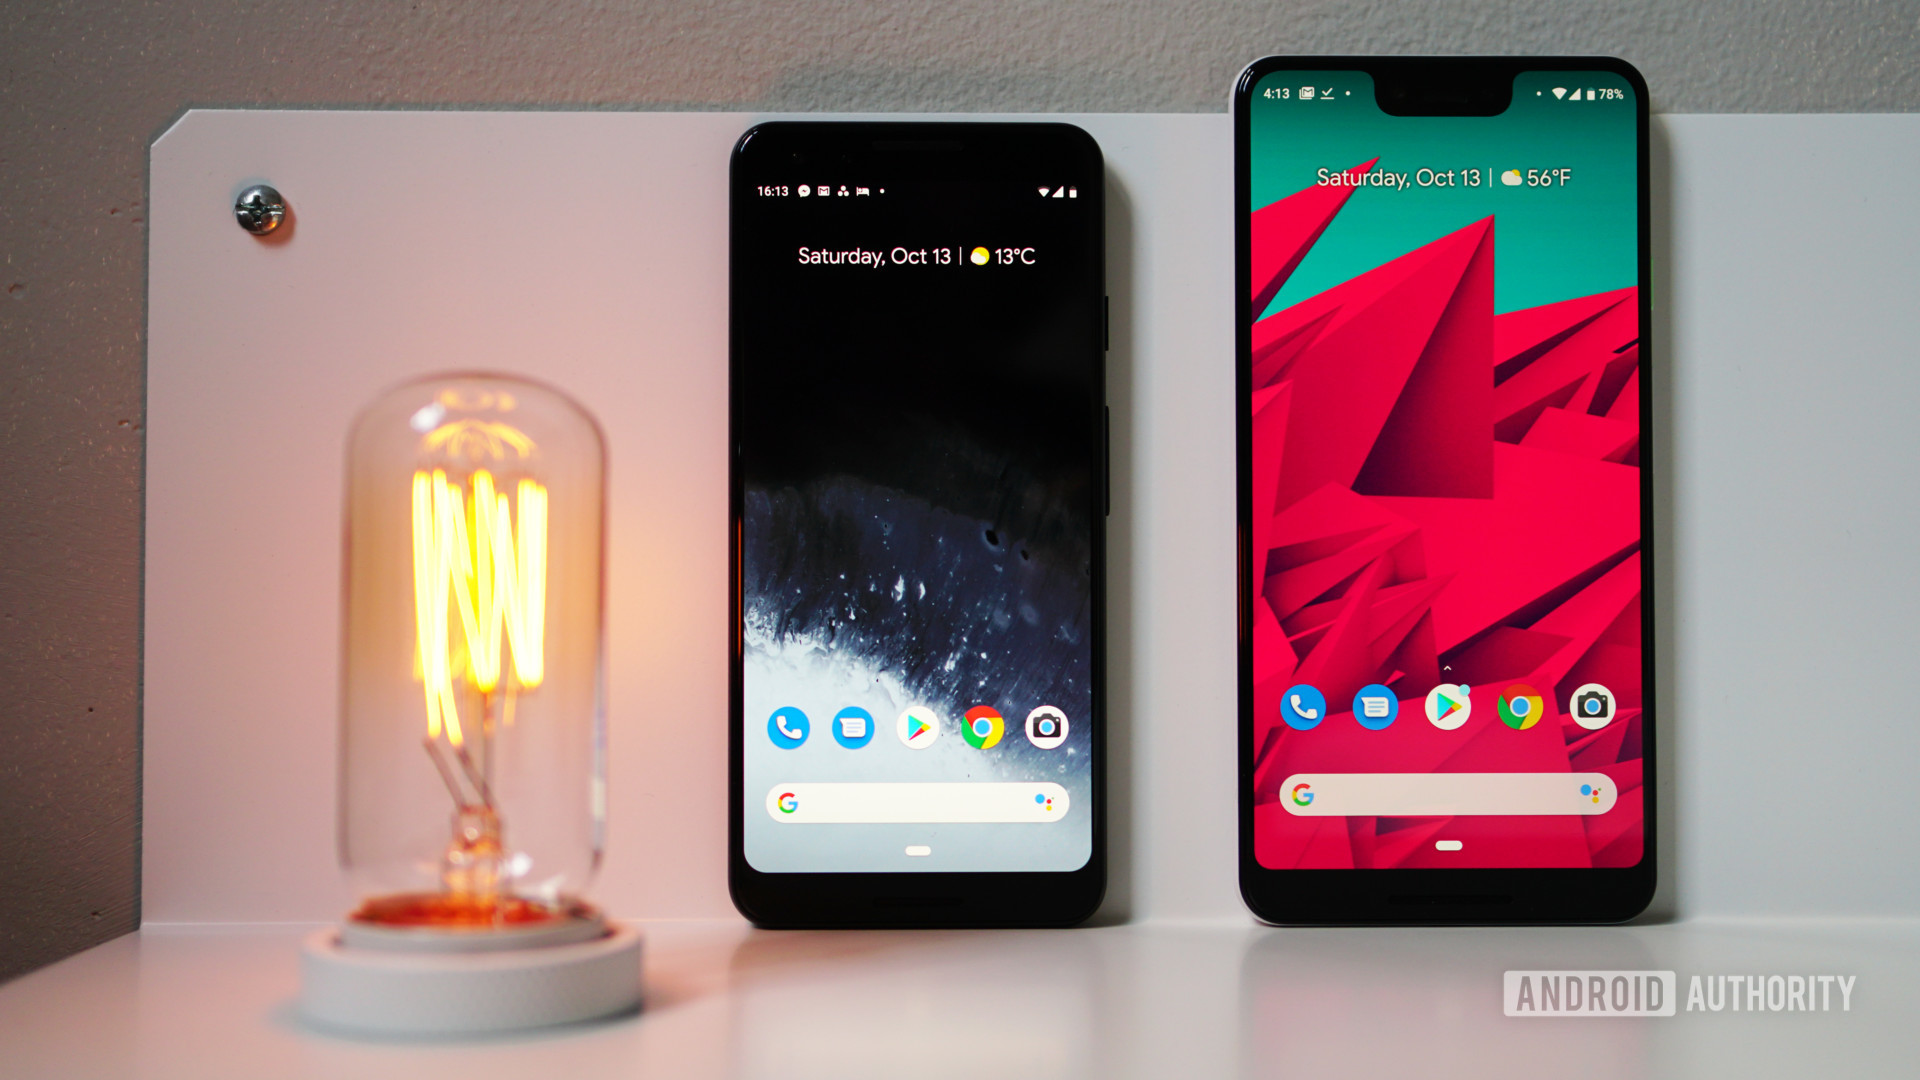 Google Pixel 3 and Google Pixel 3 XL review: The Android iPhone